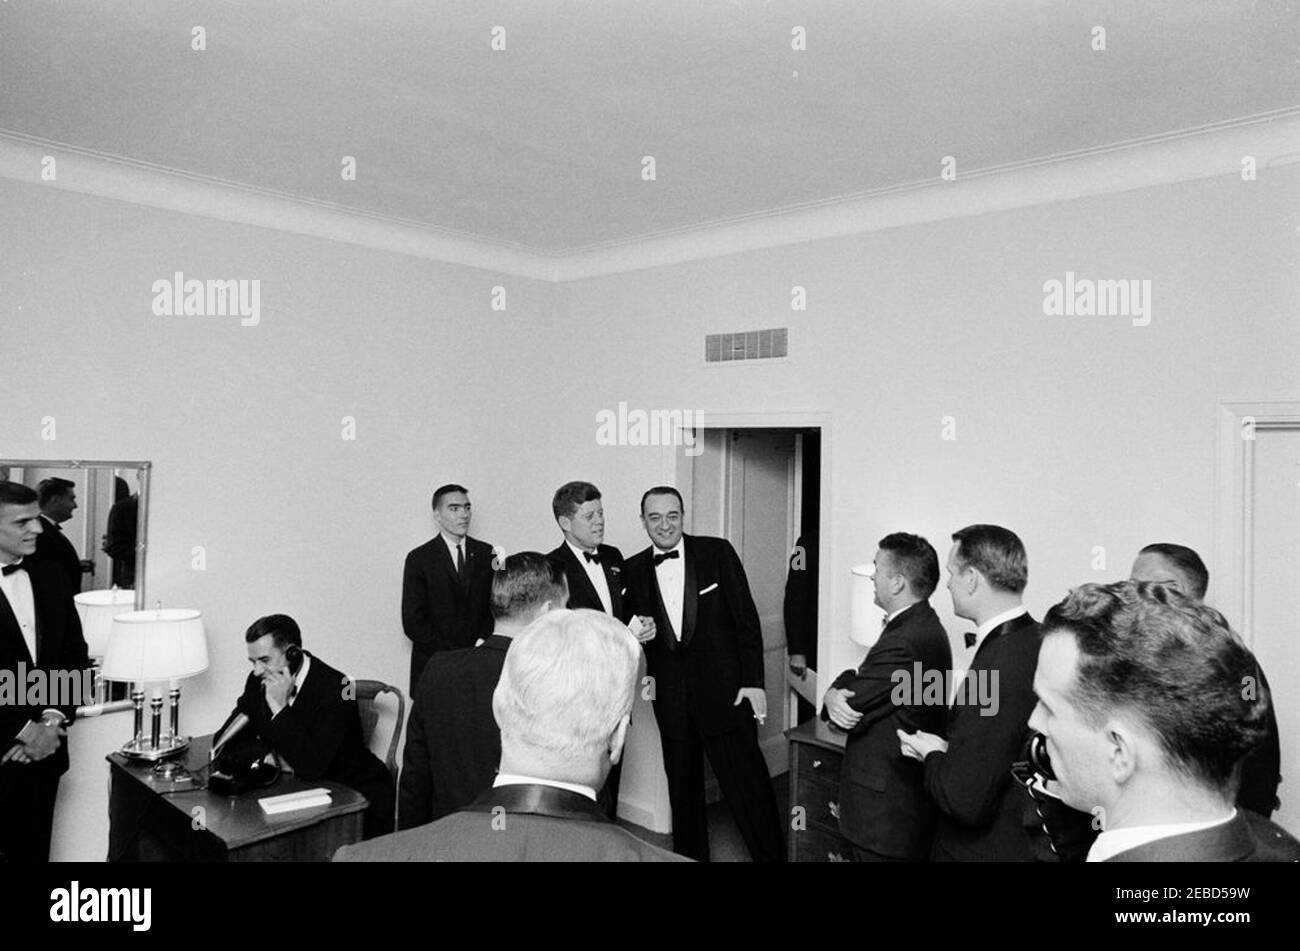 Football Hall of Fame Dinner, New York City, 10:00PM. President John F. Kennedy visits with attendees of the Football Hall of Fame Dinner. L-R: University of Alabama quarterback, Pat Trammell; University of Alabama President, Dr. Frank Rose (speaking on telephone); White House Army Signal Agency (WHASA) staff member, John J. Cochran; Alabama businessman, Tom Russell (in foreground, back to camera); Press Secretary Pierre Salinger (in front of Russell, back to camera); President Kennedy; sportscaster, Mel Allen; Birmingham News sports writer, Benny Marshall; University of Alabama sports Hall of Stock Photo